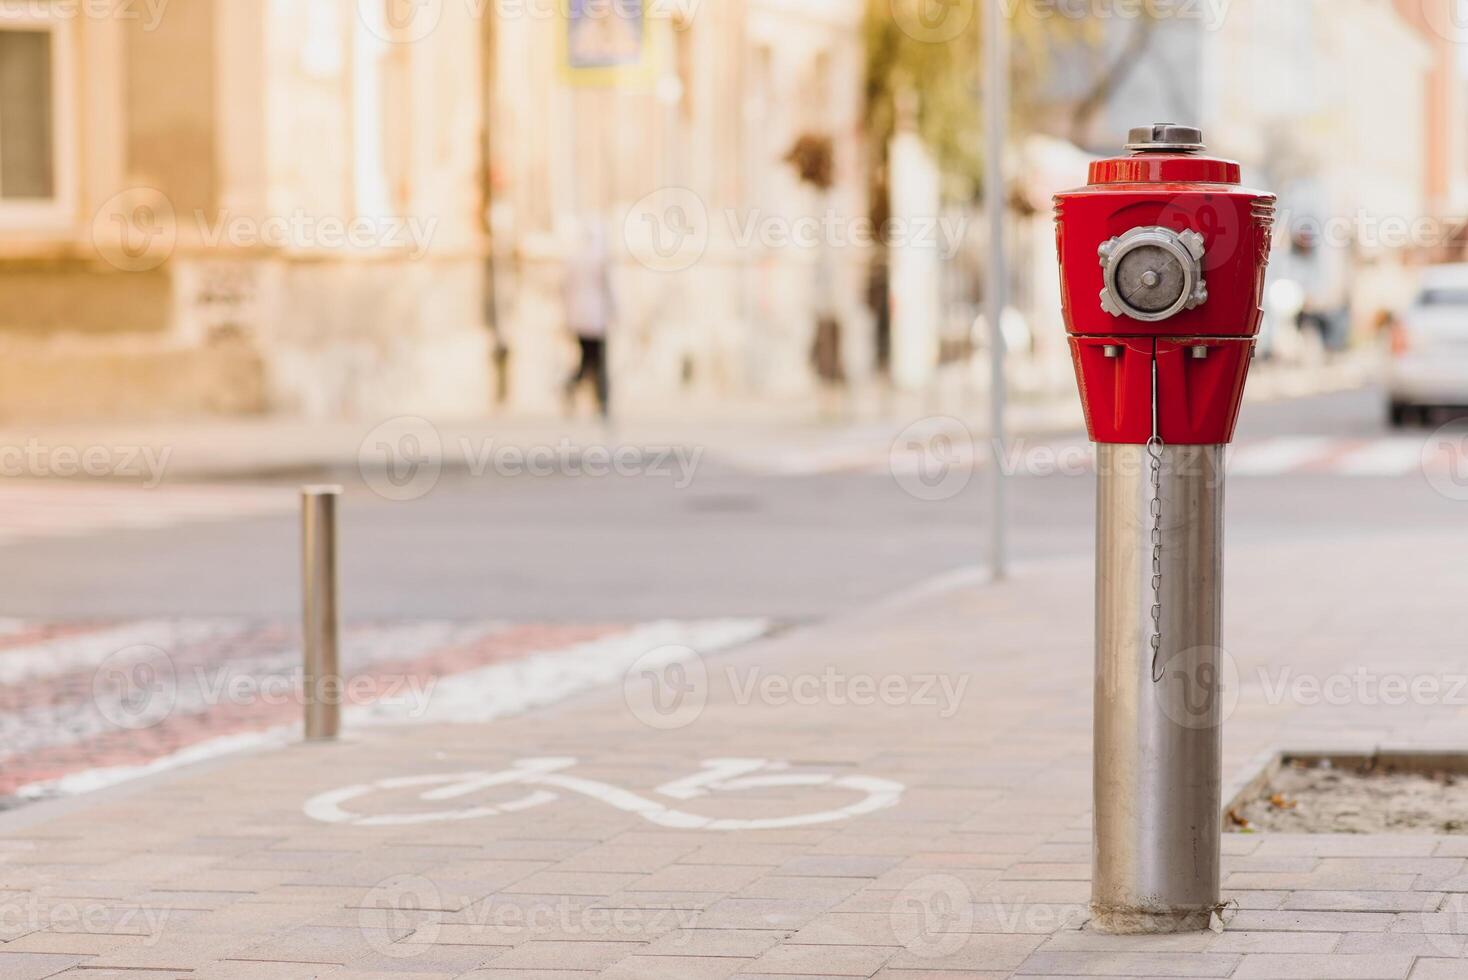 Typical american red fire hydrant photo